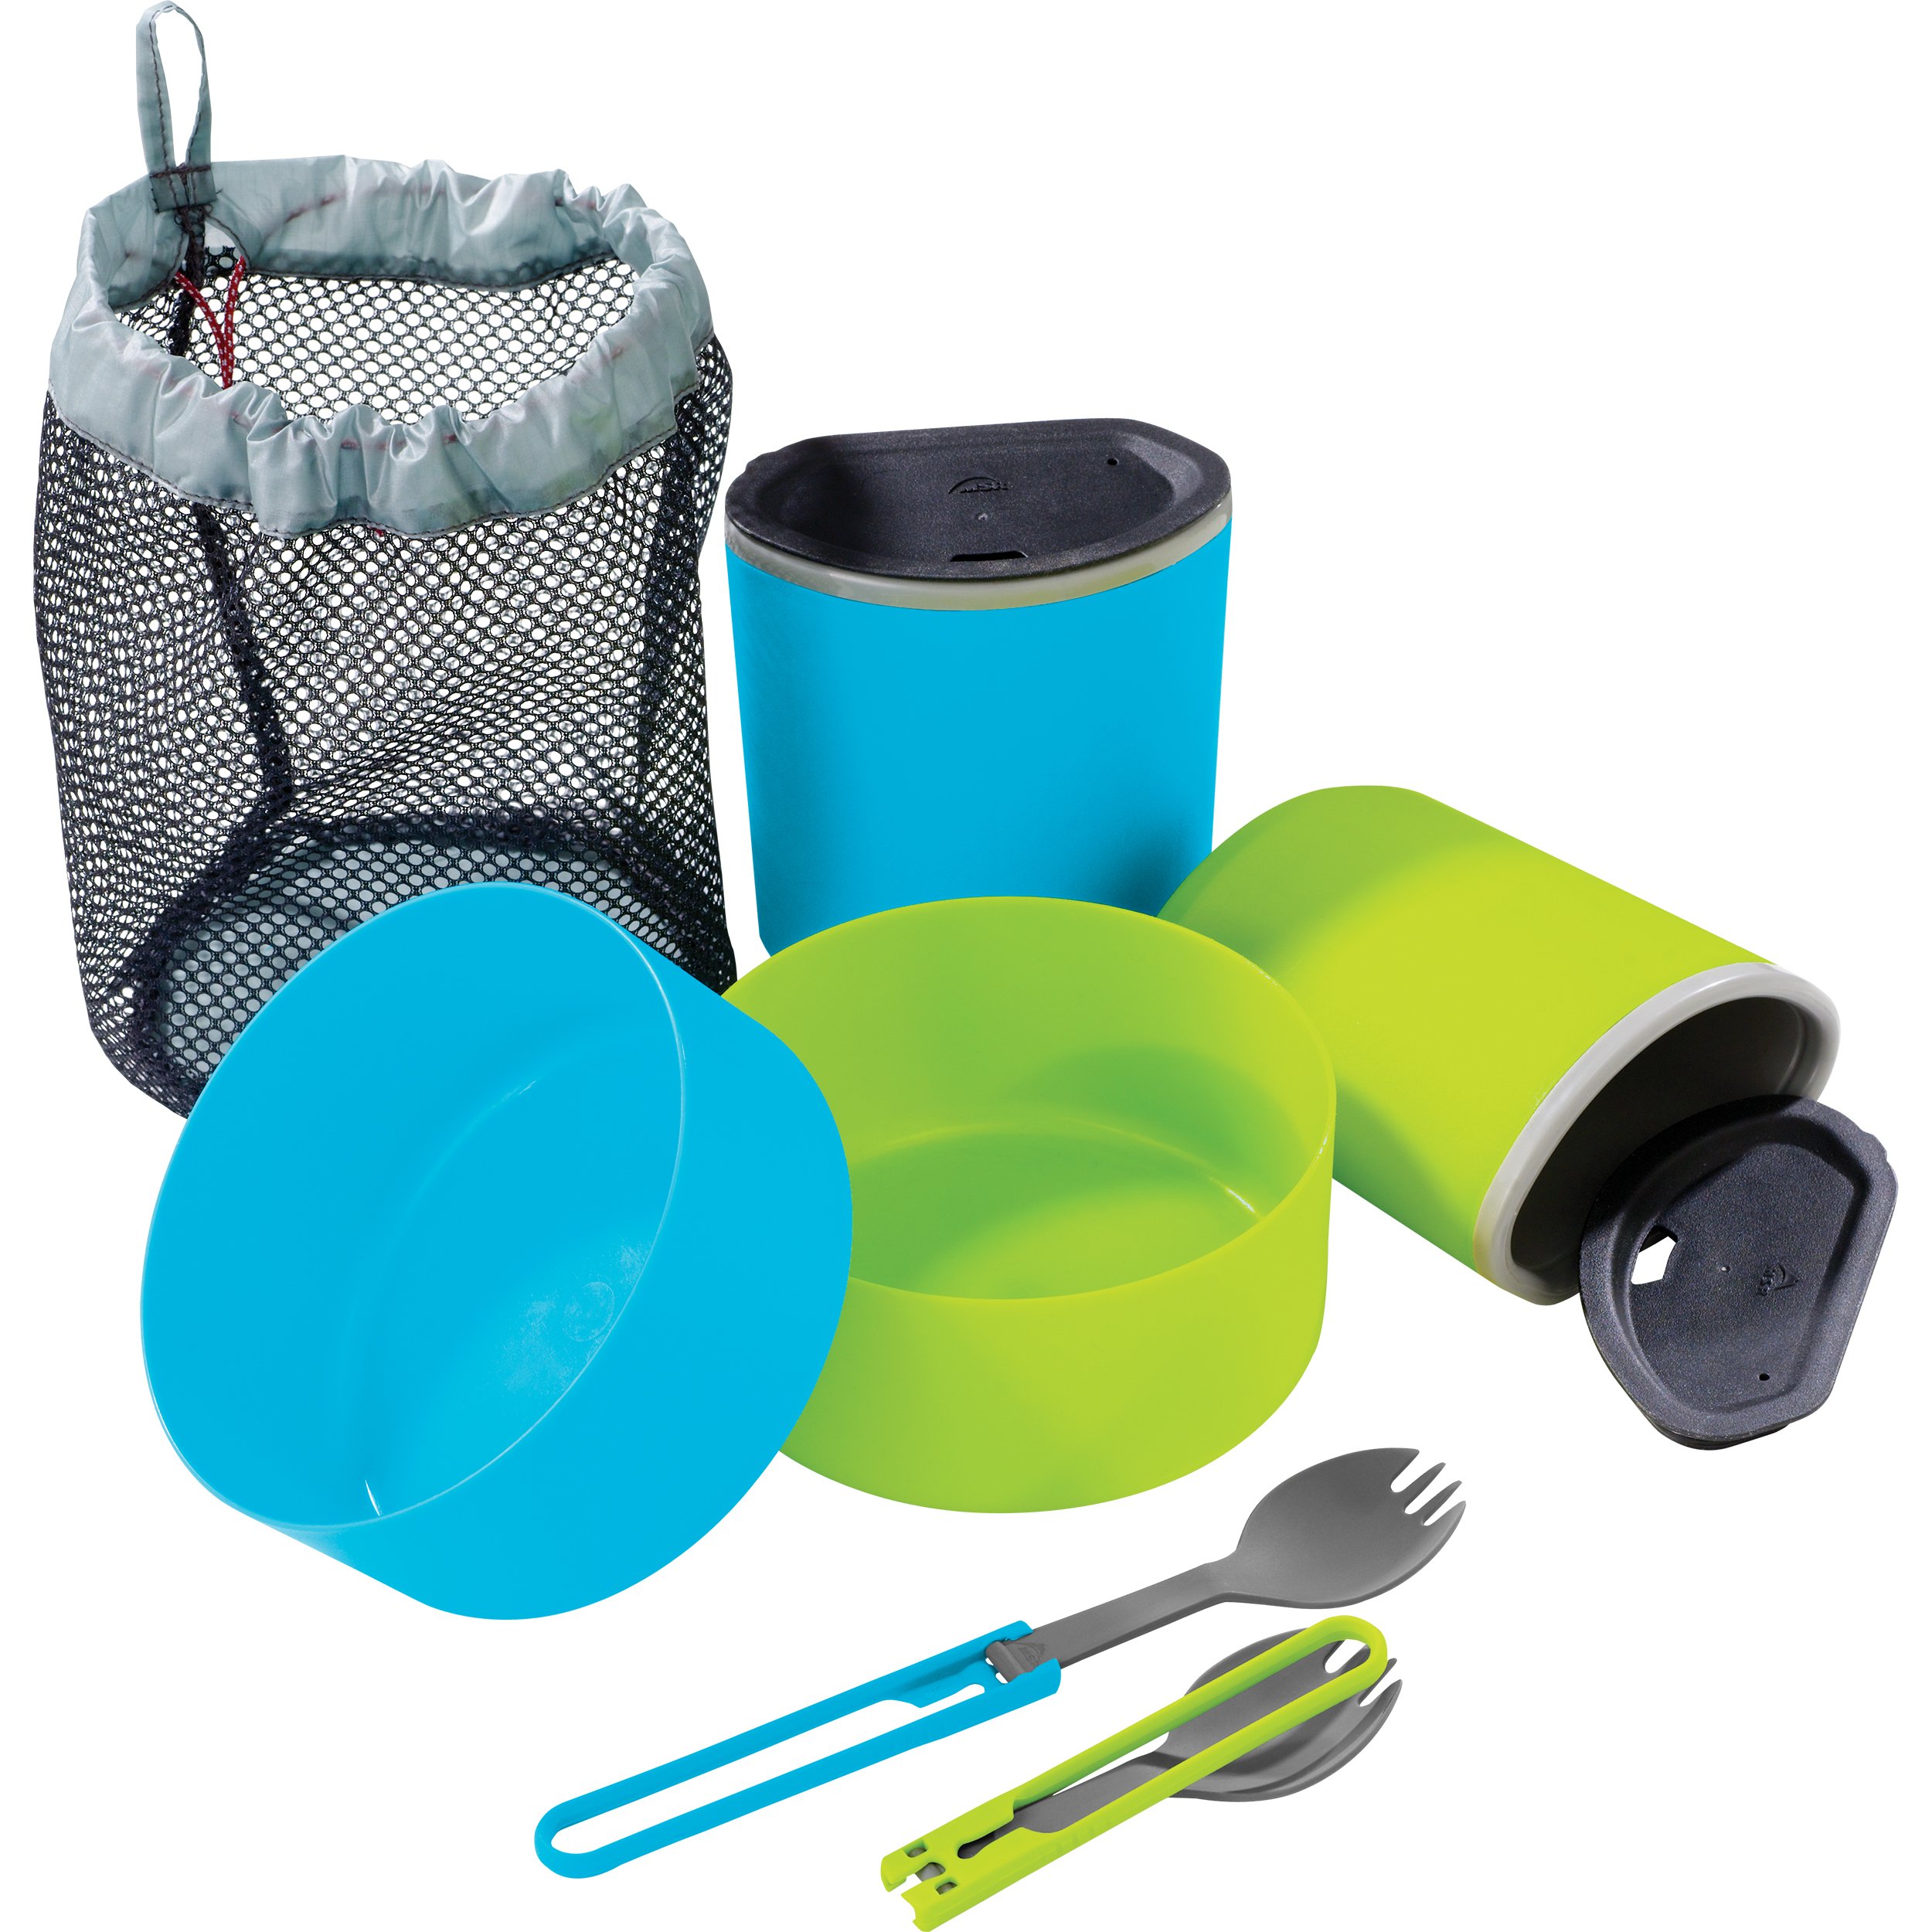 Using plastic cooking pot liners for backpacking food